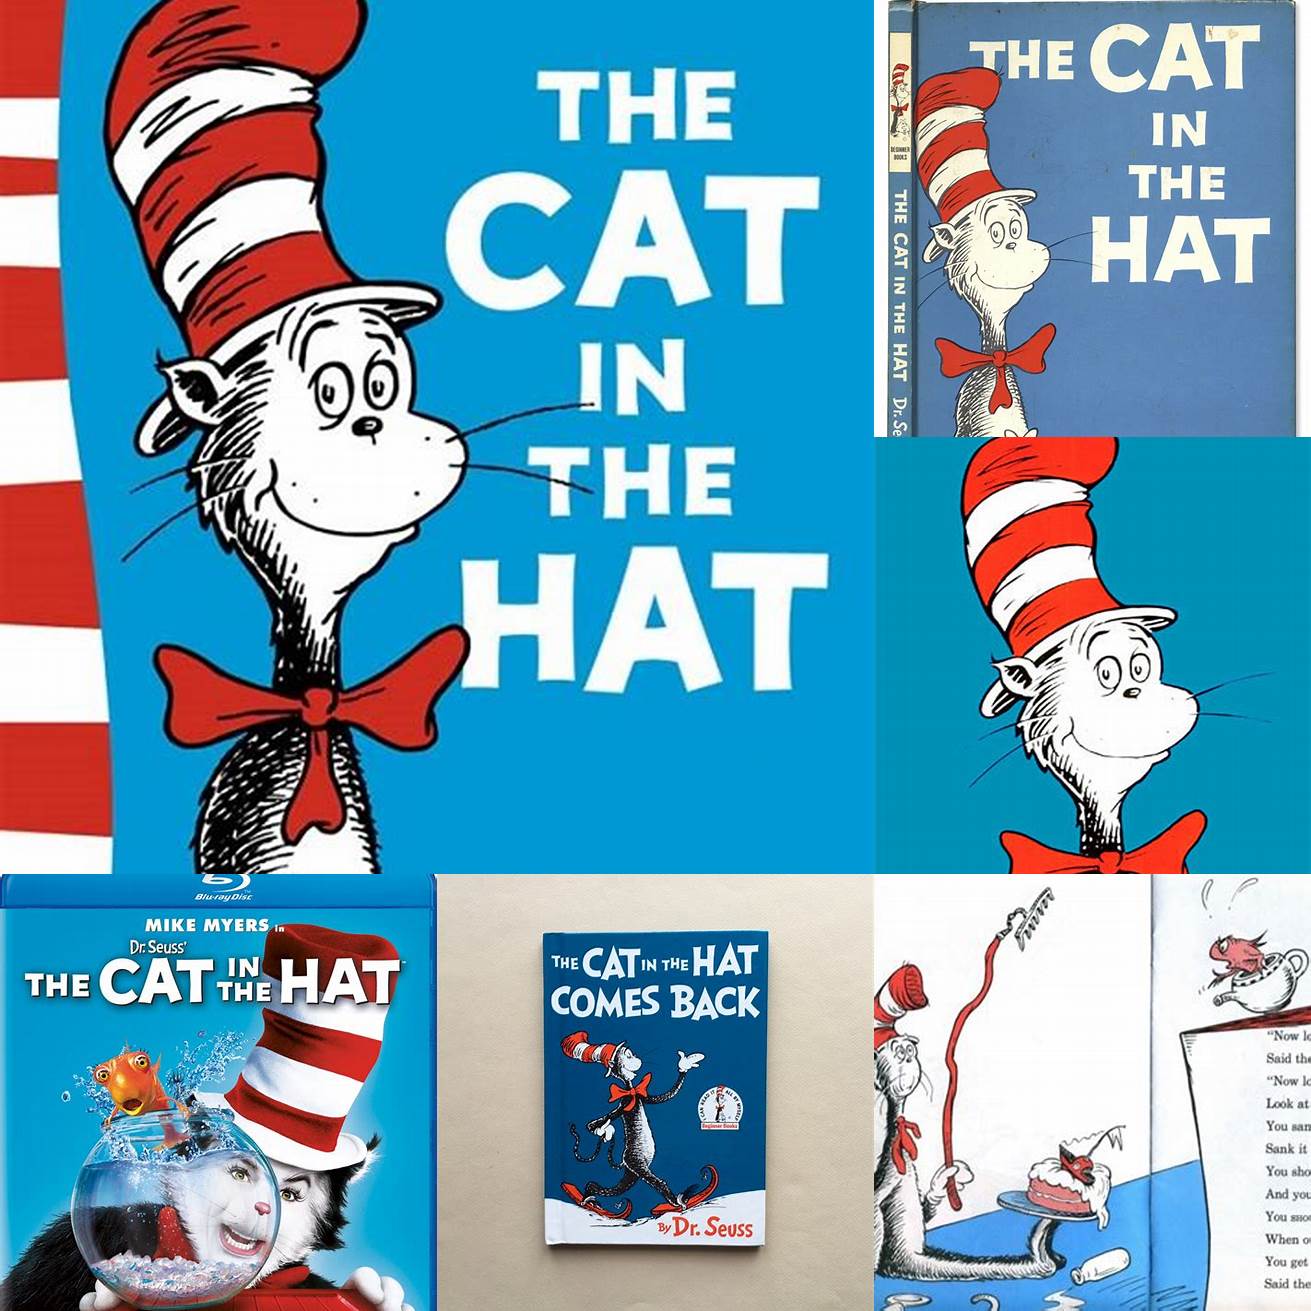 Take a drink every time the Cat in the Hat appears on screen or is mentioned in the book